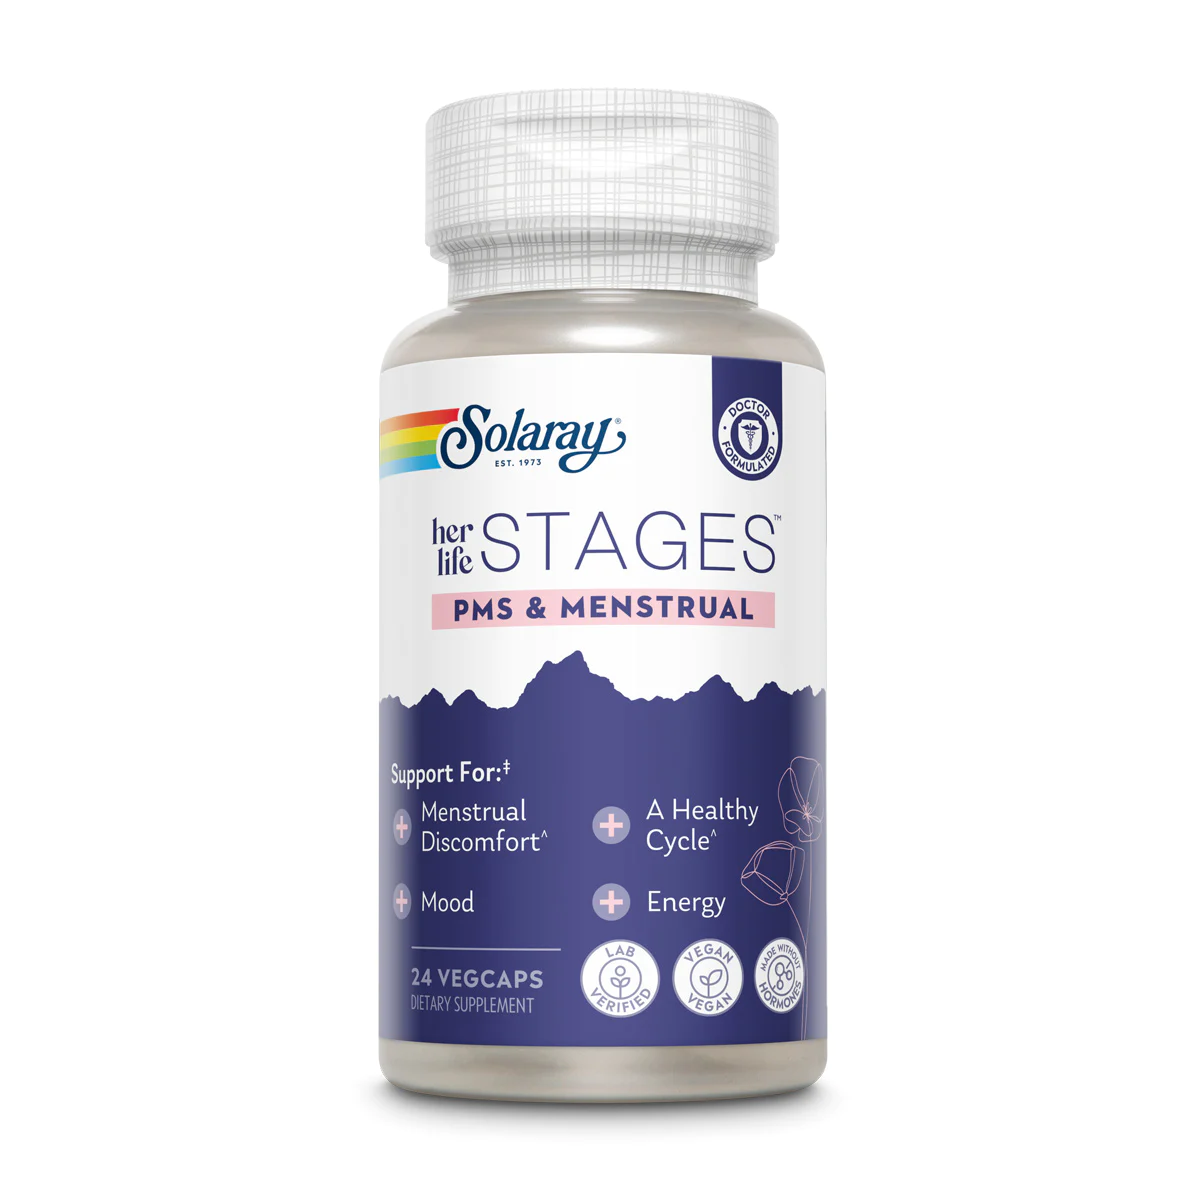 Her Life Stages PMS & Menstrual - Solaray